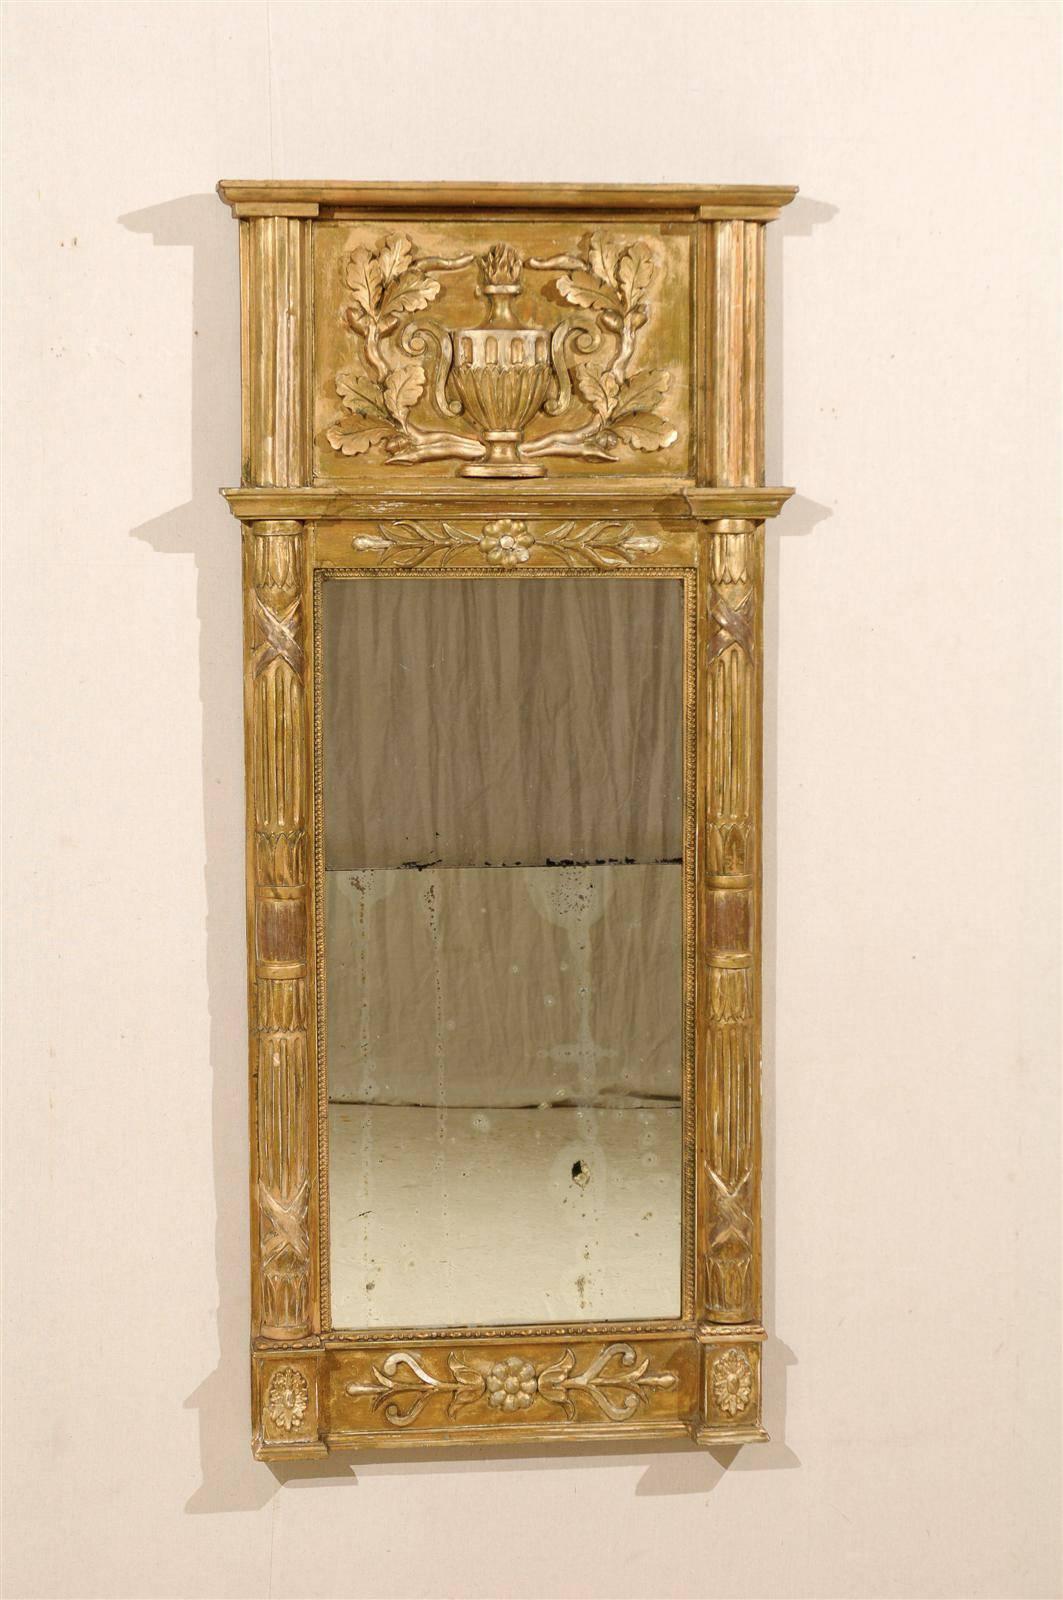 An exquisite Swedish 19th century gilded wood slender mirror with carved fire urn and floral decoration and sides flanked with fluted half-columns. Gilt over gesso.